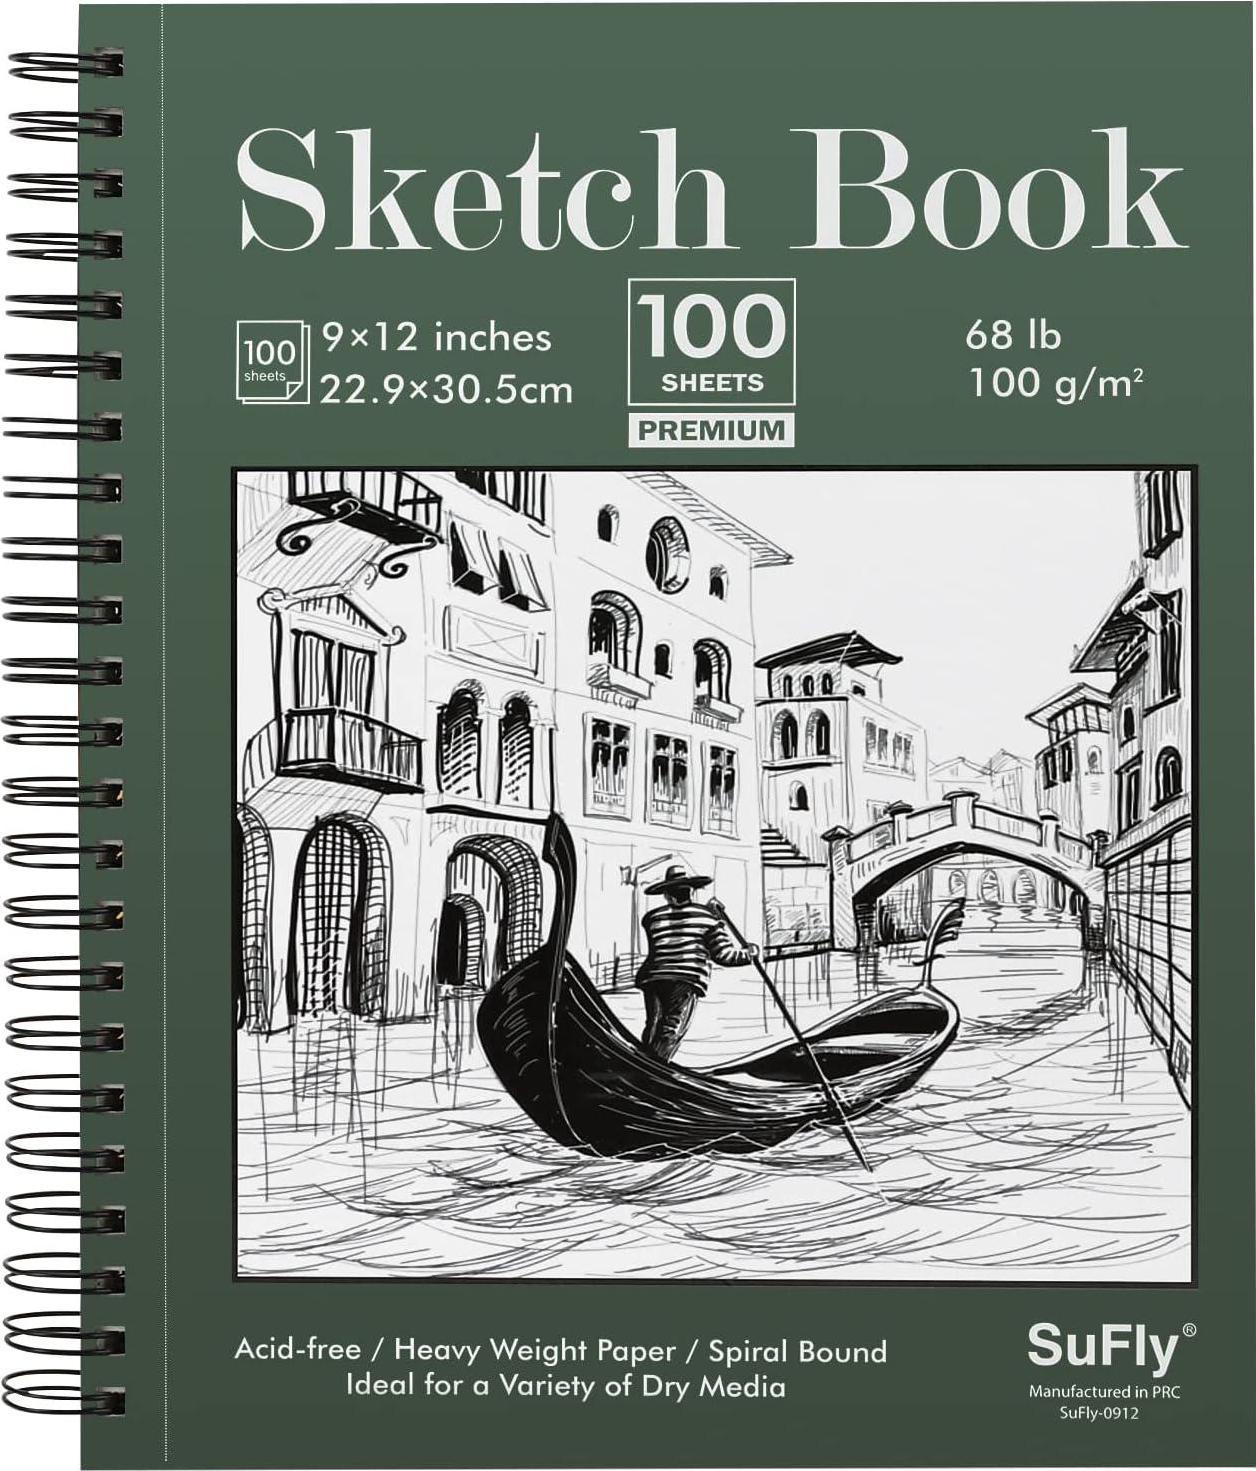  Dyvicl Sketch Pad 5.5x8.5 Sketch Book, 100 Sheets